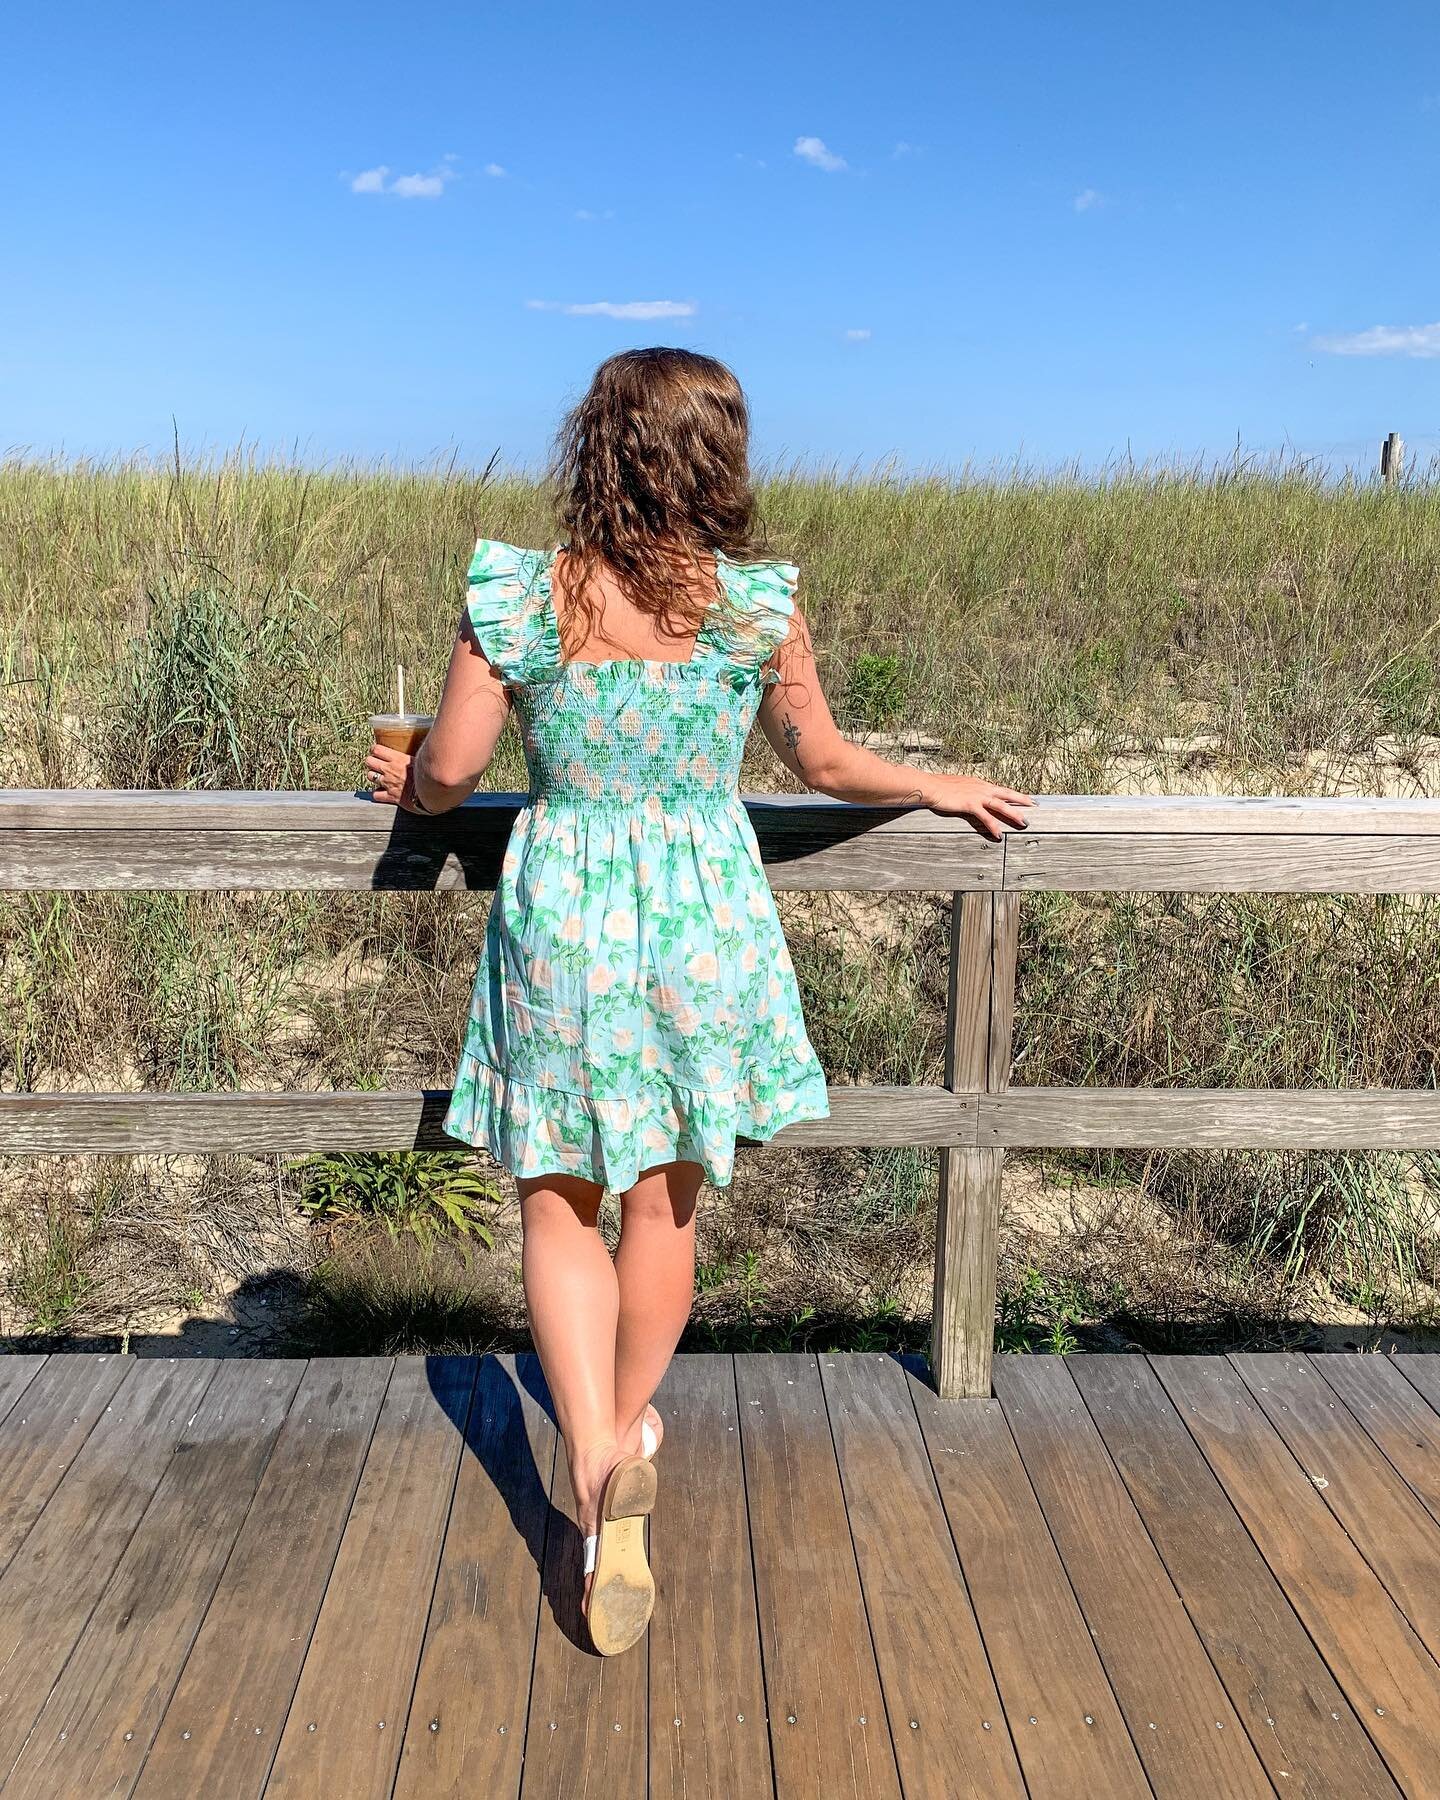 Savoring every last moment of summer before the unofficial end of the season this weekend. It&rsquo;s especially easy to keep feeling those vibes when at the beach in my new @hillhouse dress- which is current on sale for 20% off!
.
.
.
Sharing 3 ways